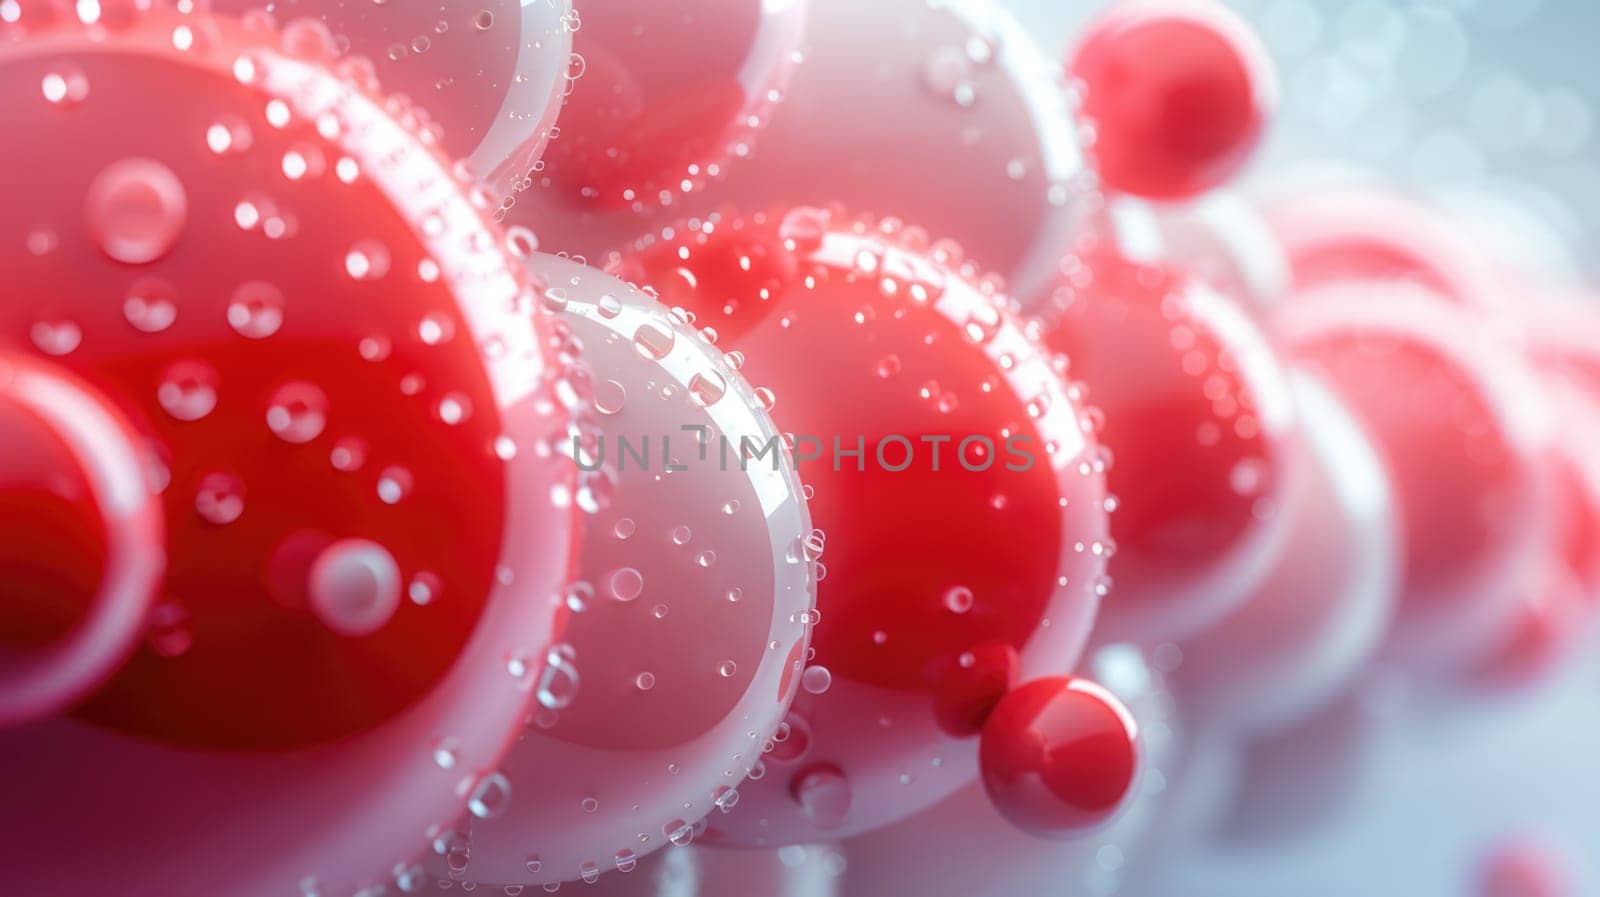 A collection of red and white balls covered in water droplets.